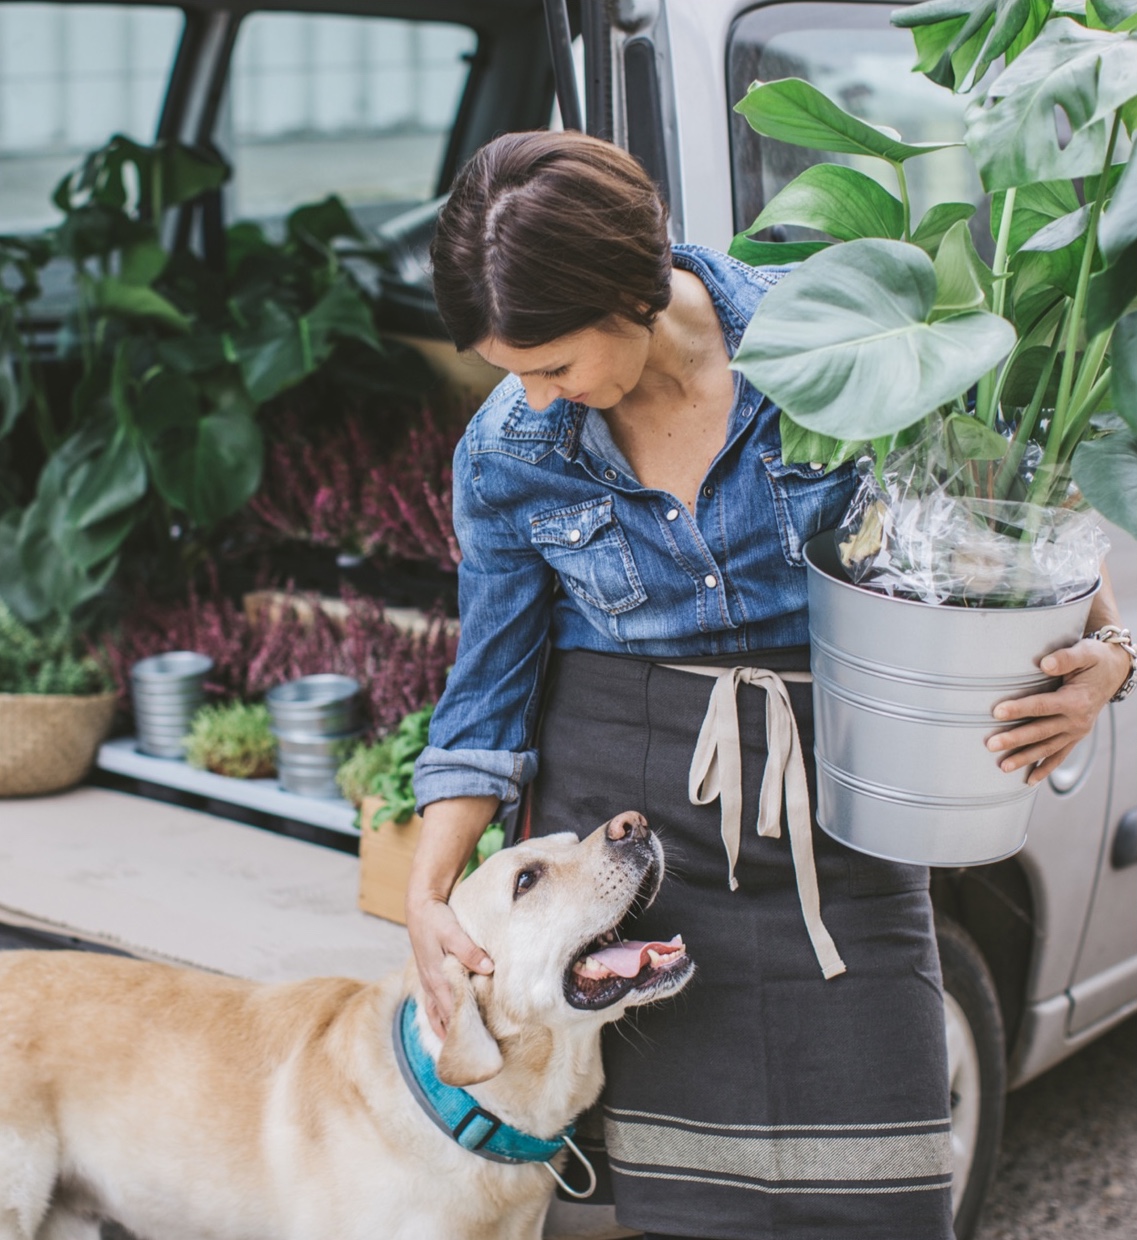 a woman carrying a houseplant pets a dog